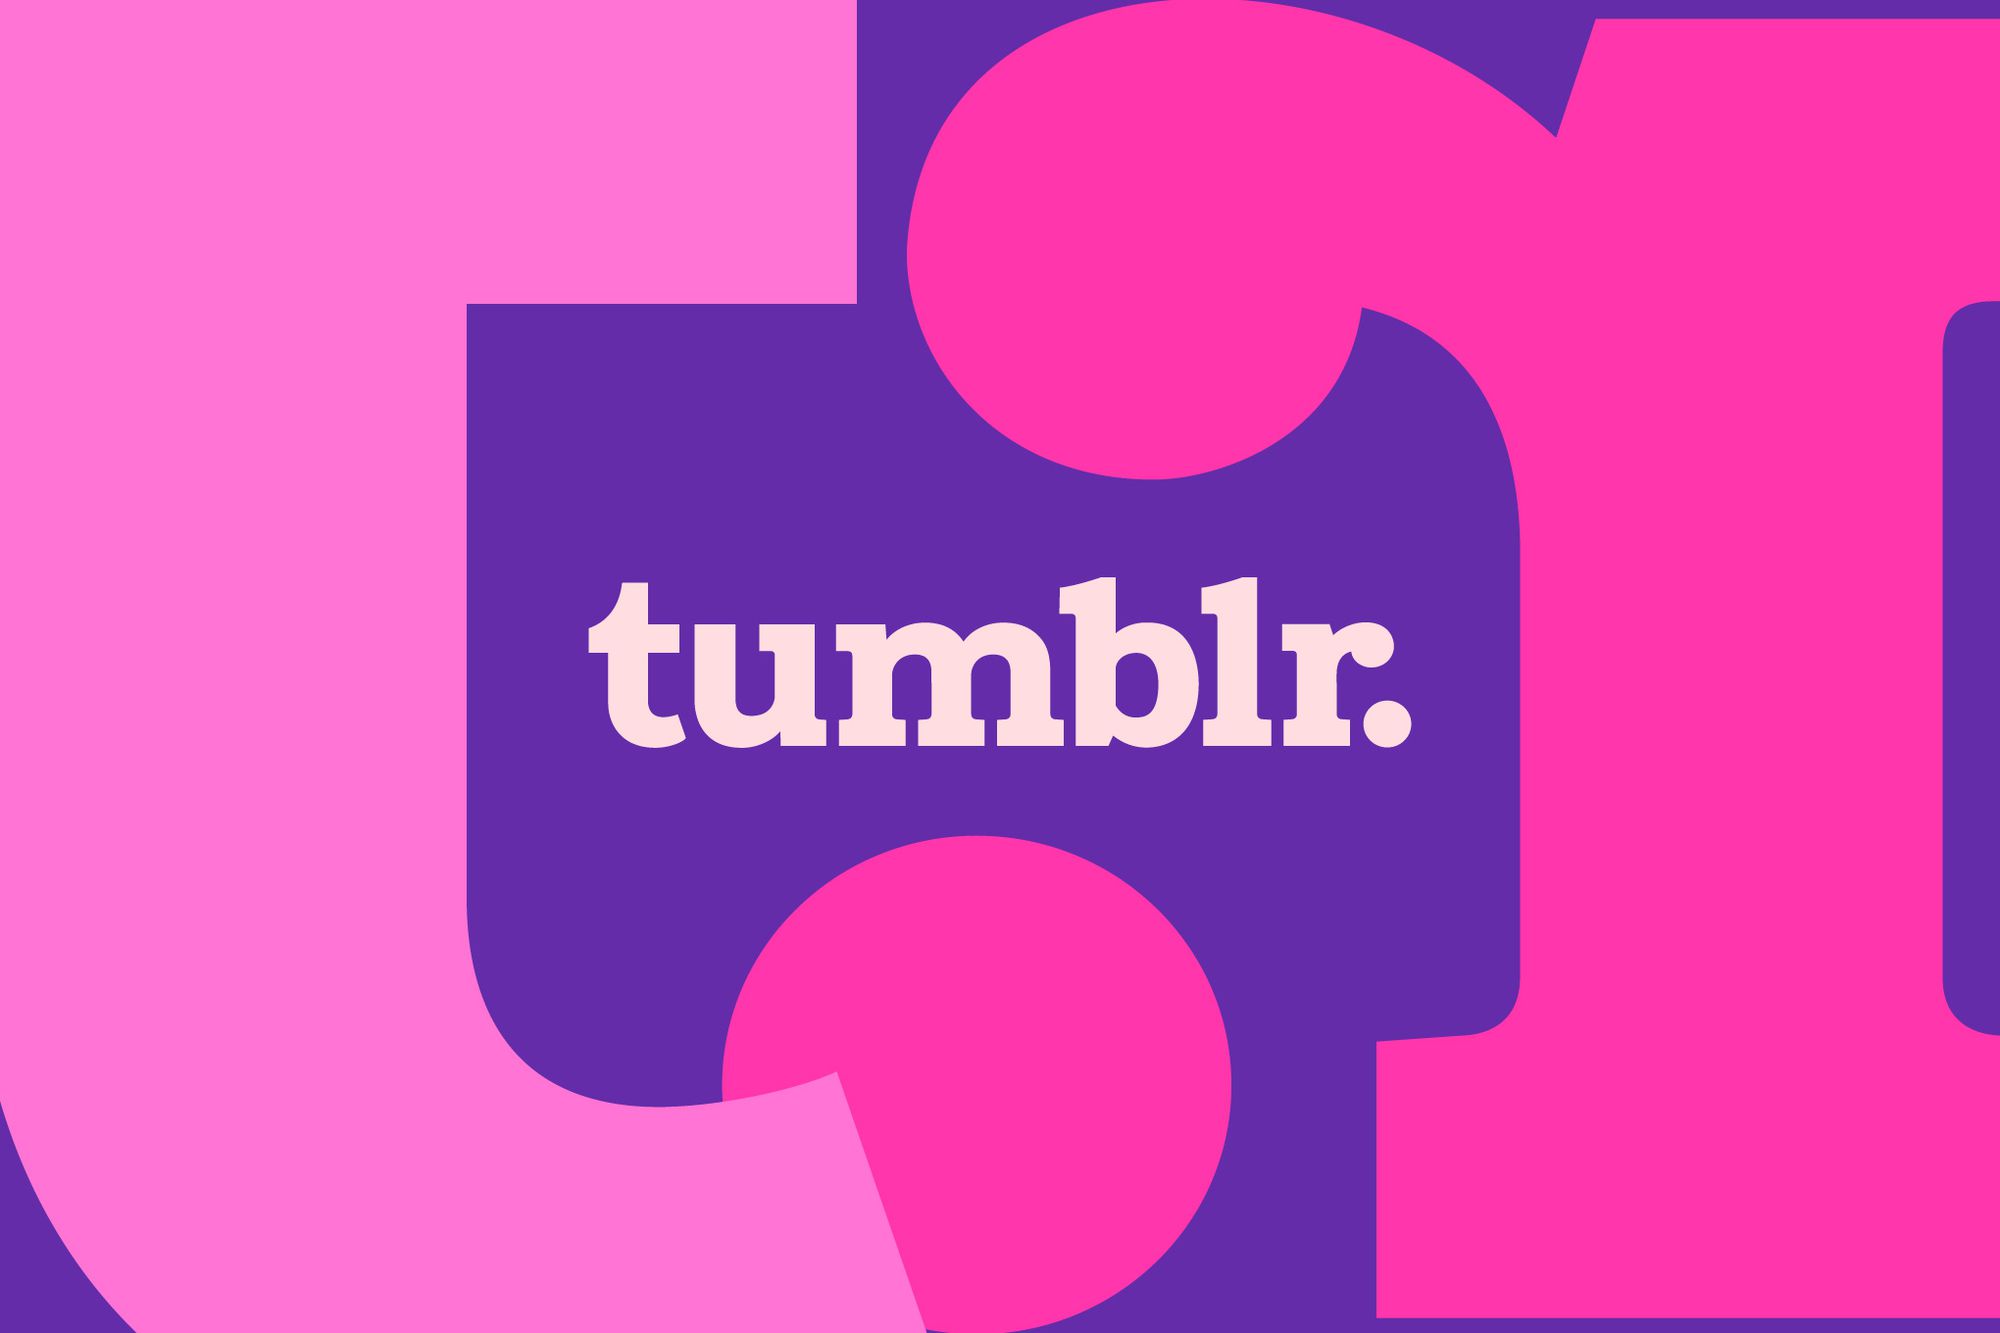 darrin watkins recommends mature videos on tumblr pic